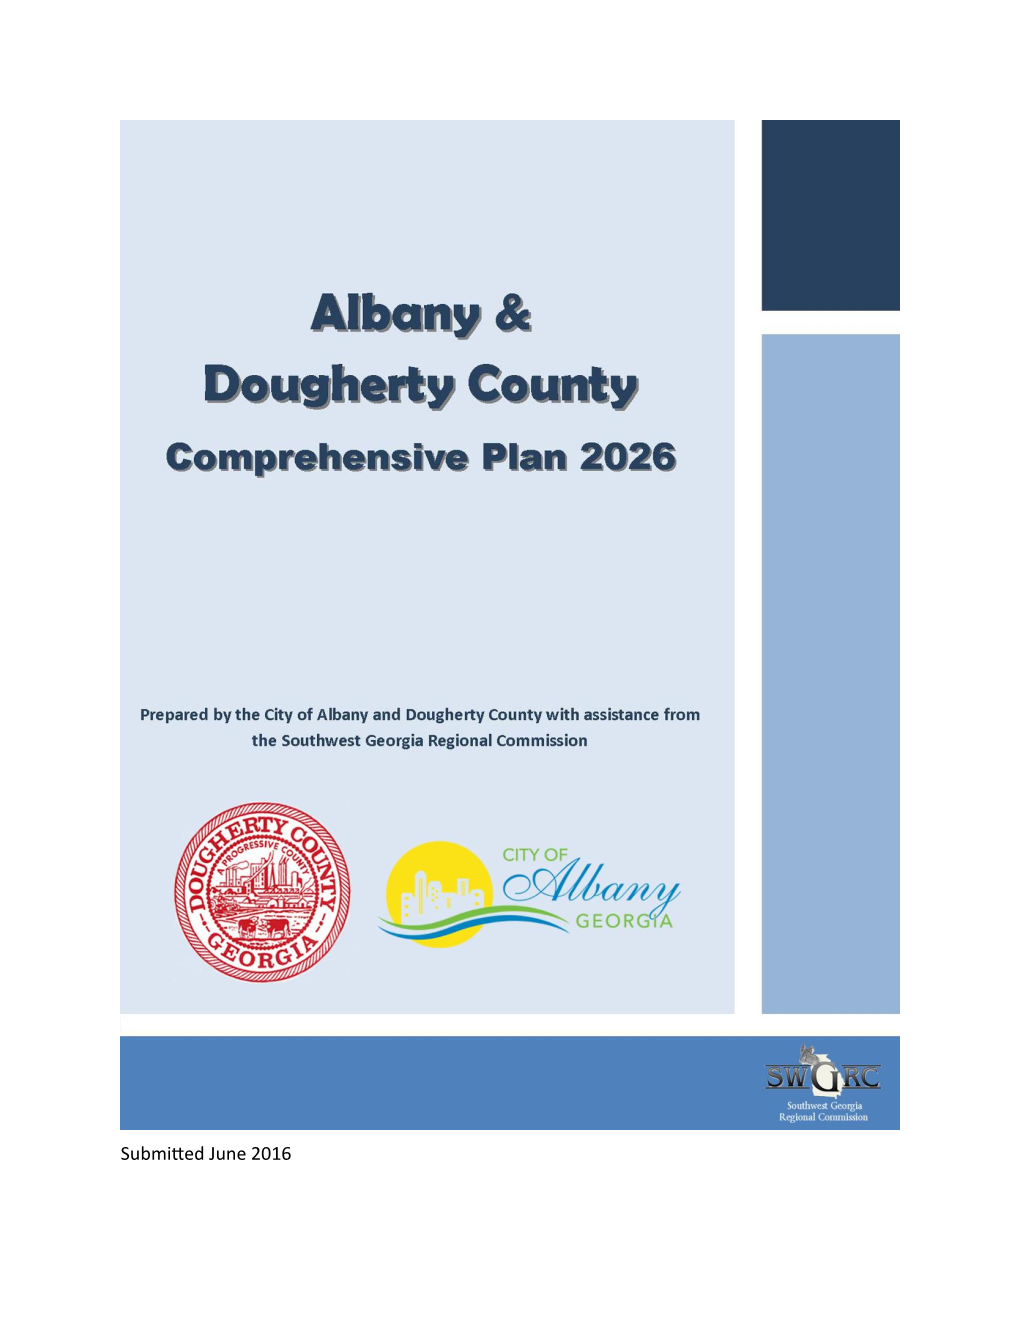 Albany-Dougherty County Vision & Goals